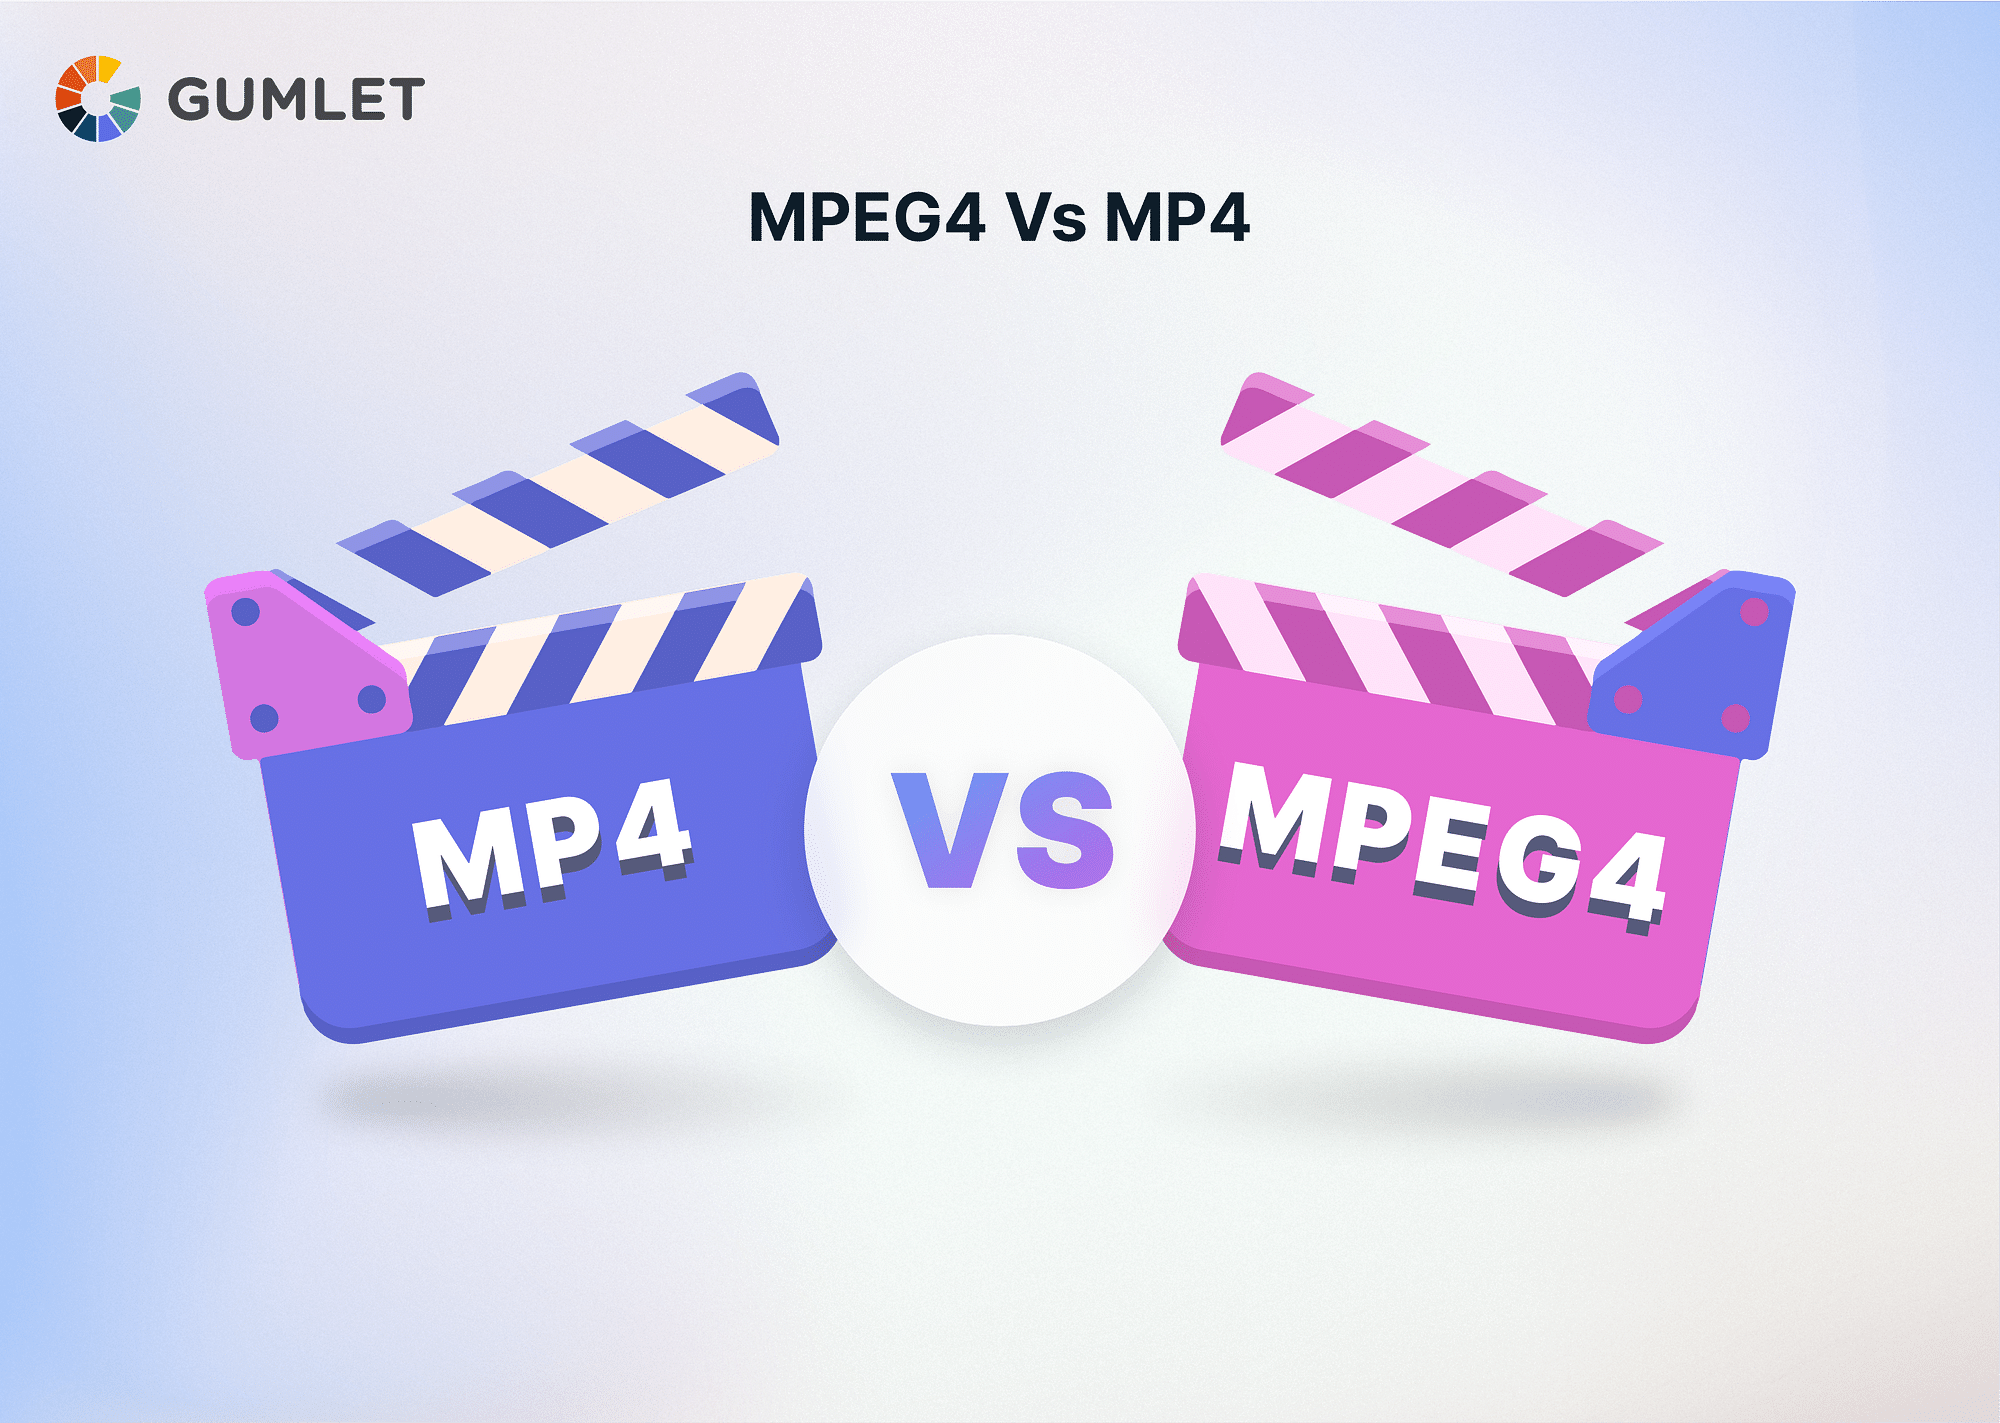 MPEG4 vs. MP4 - What's the Difference?